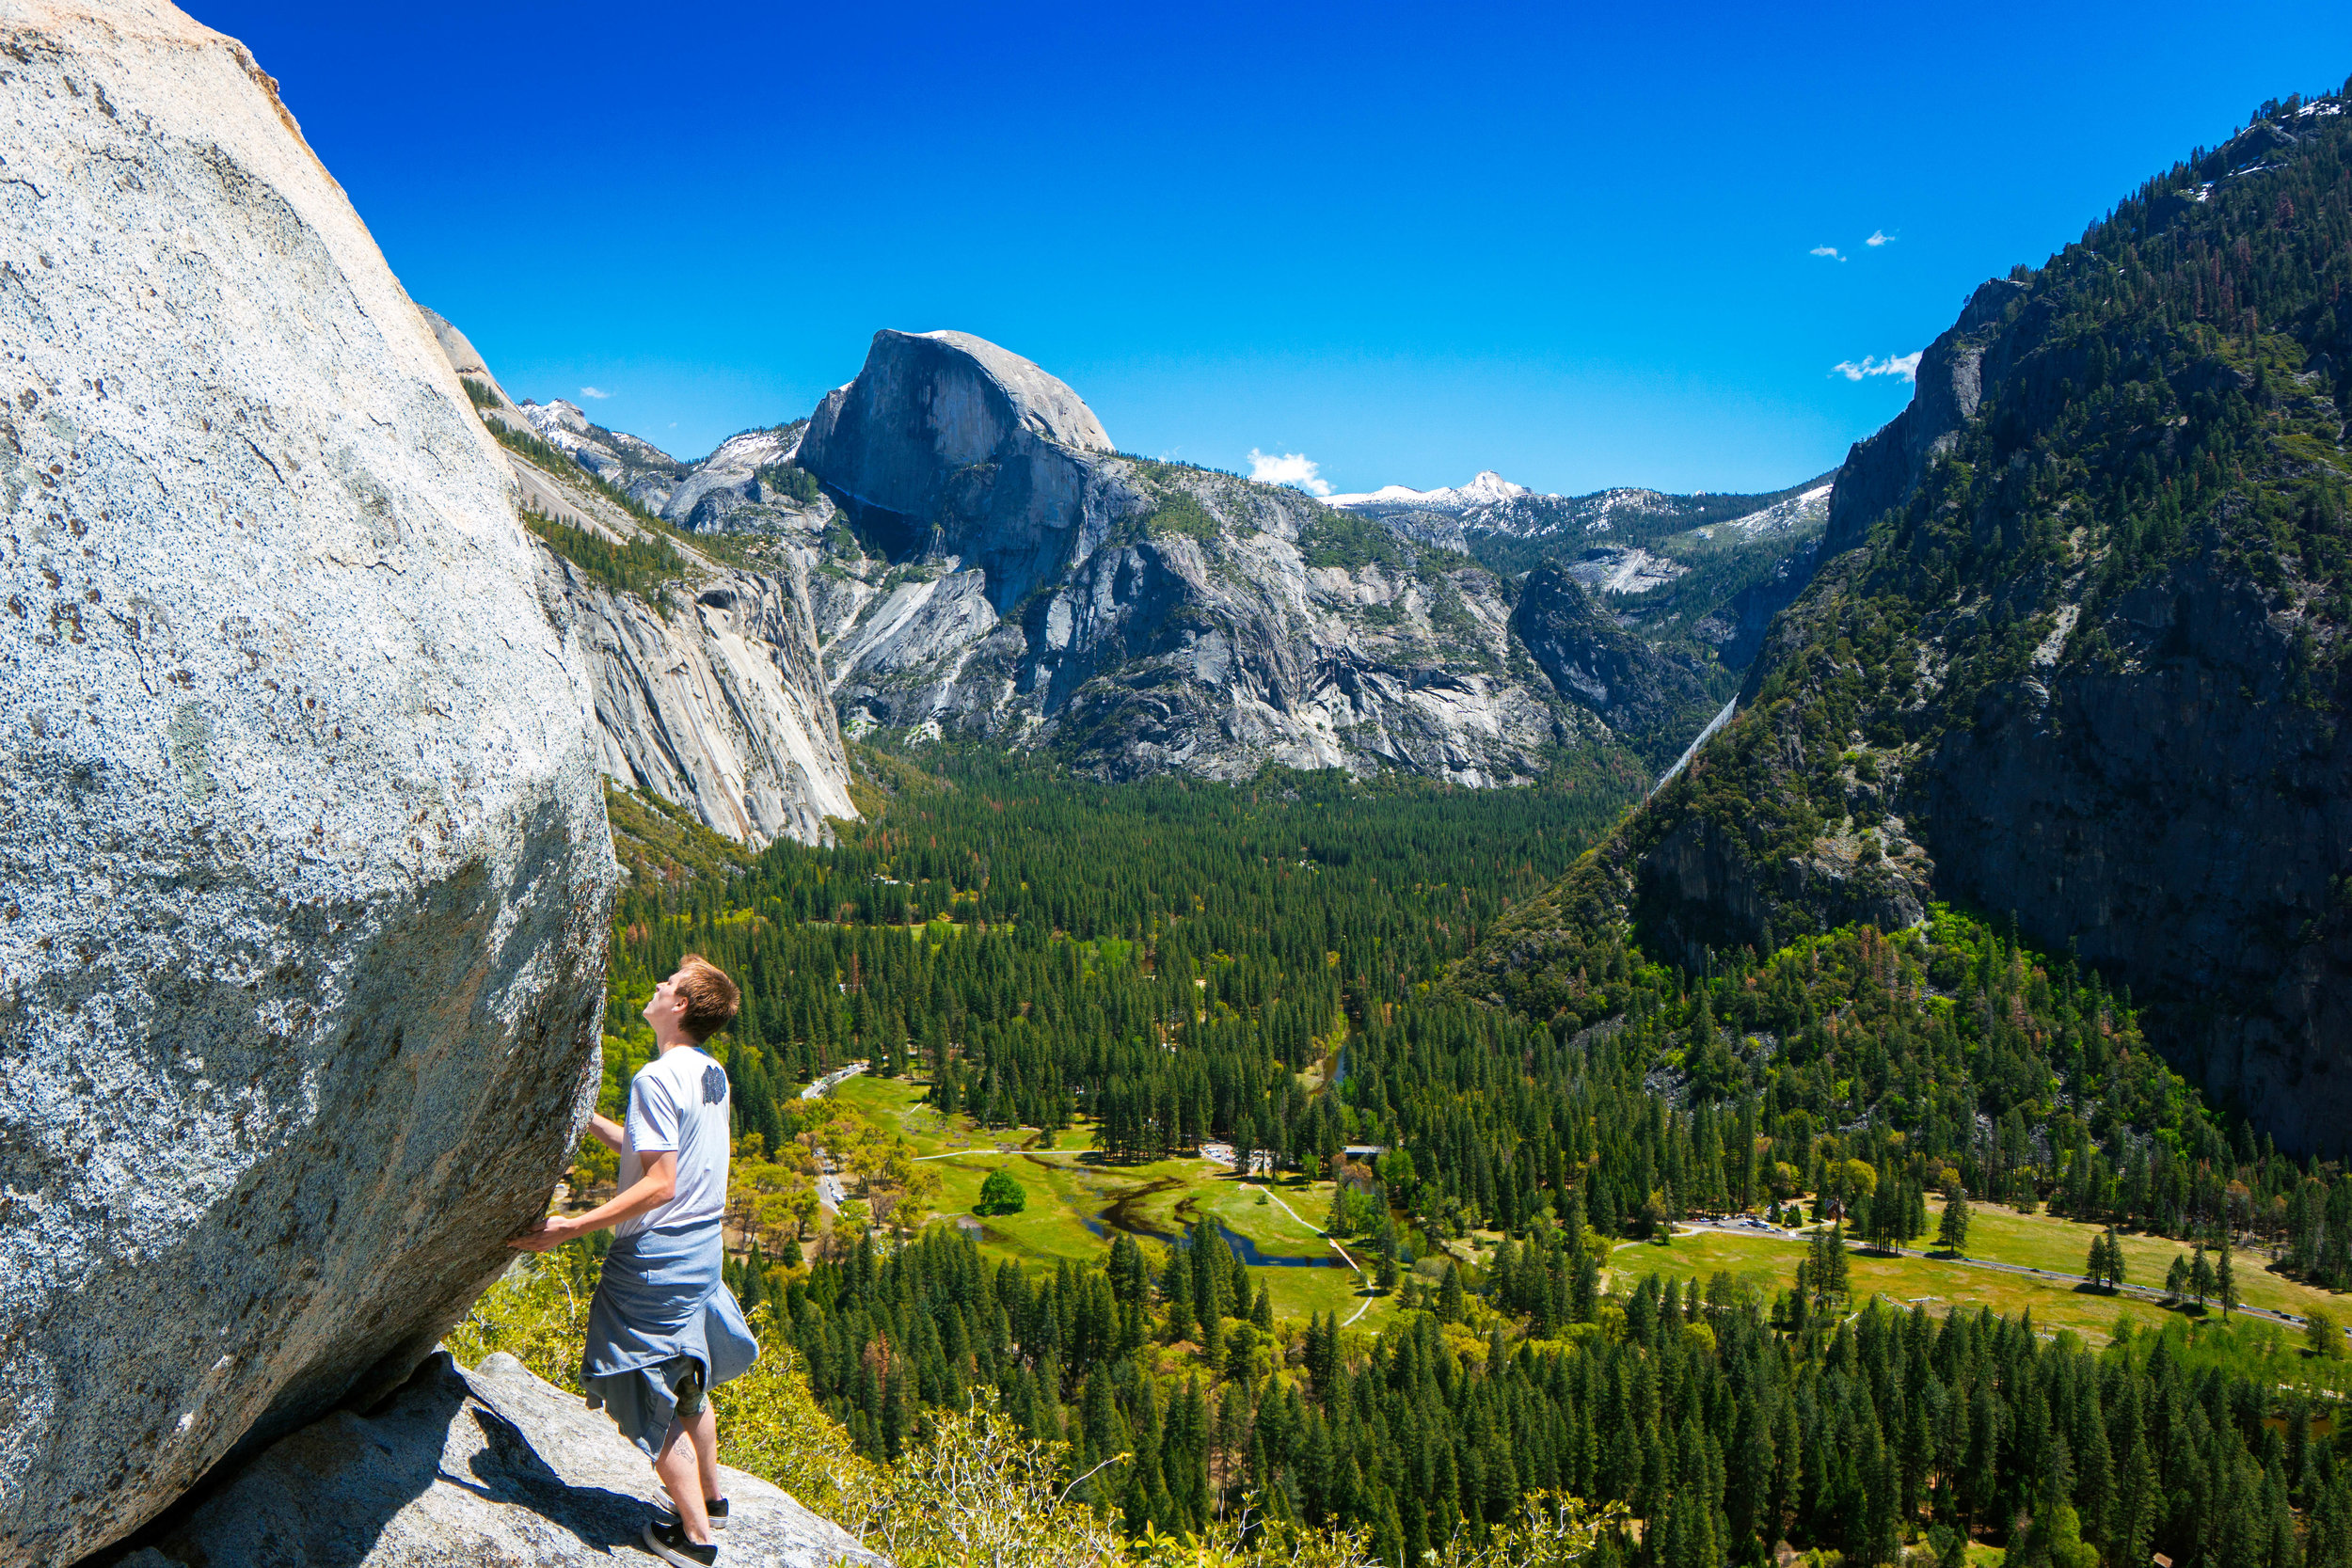 The pricless moment when someone sees Yosemite Valley for the first time